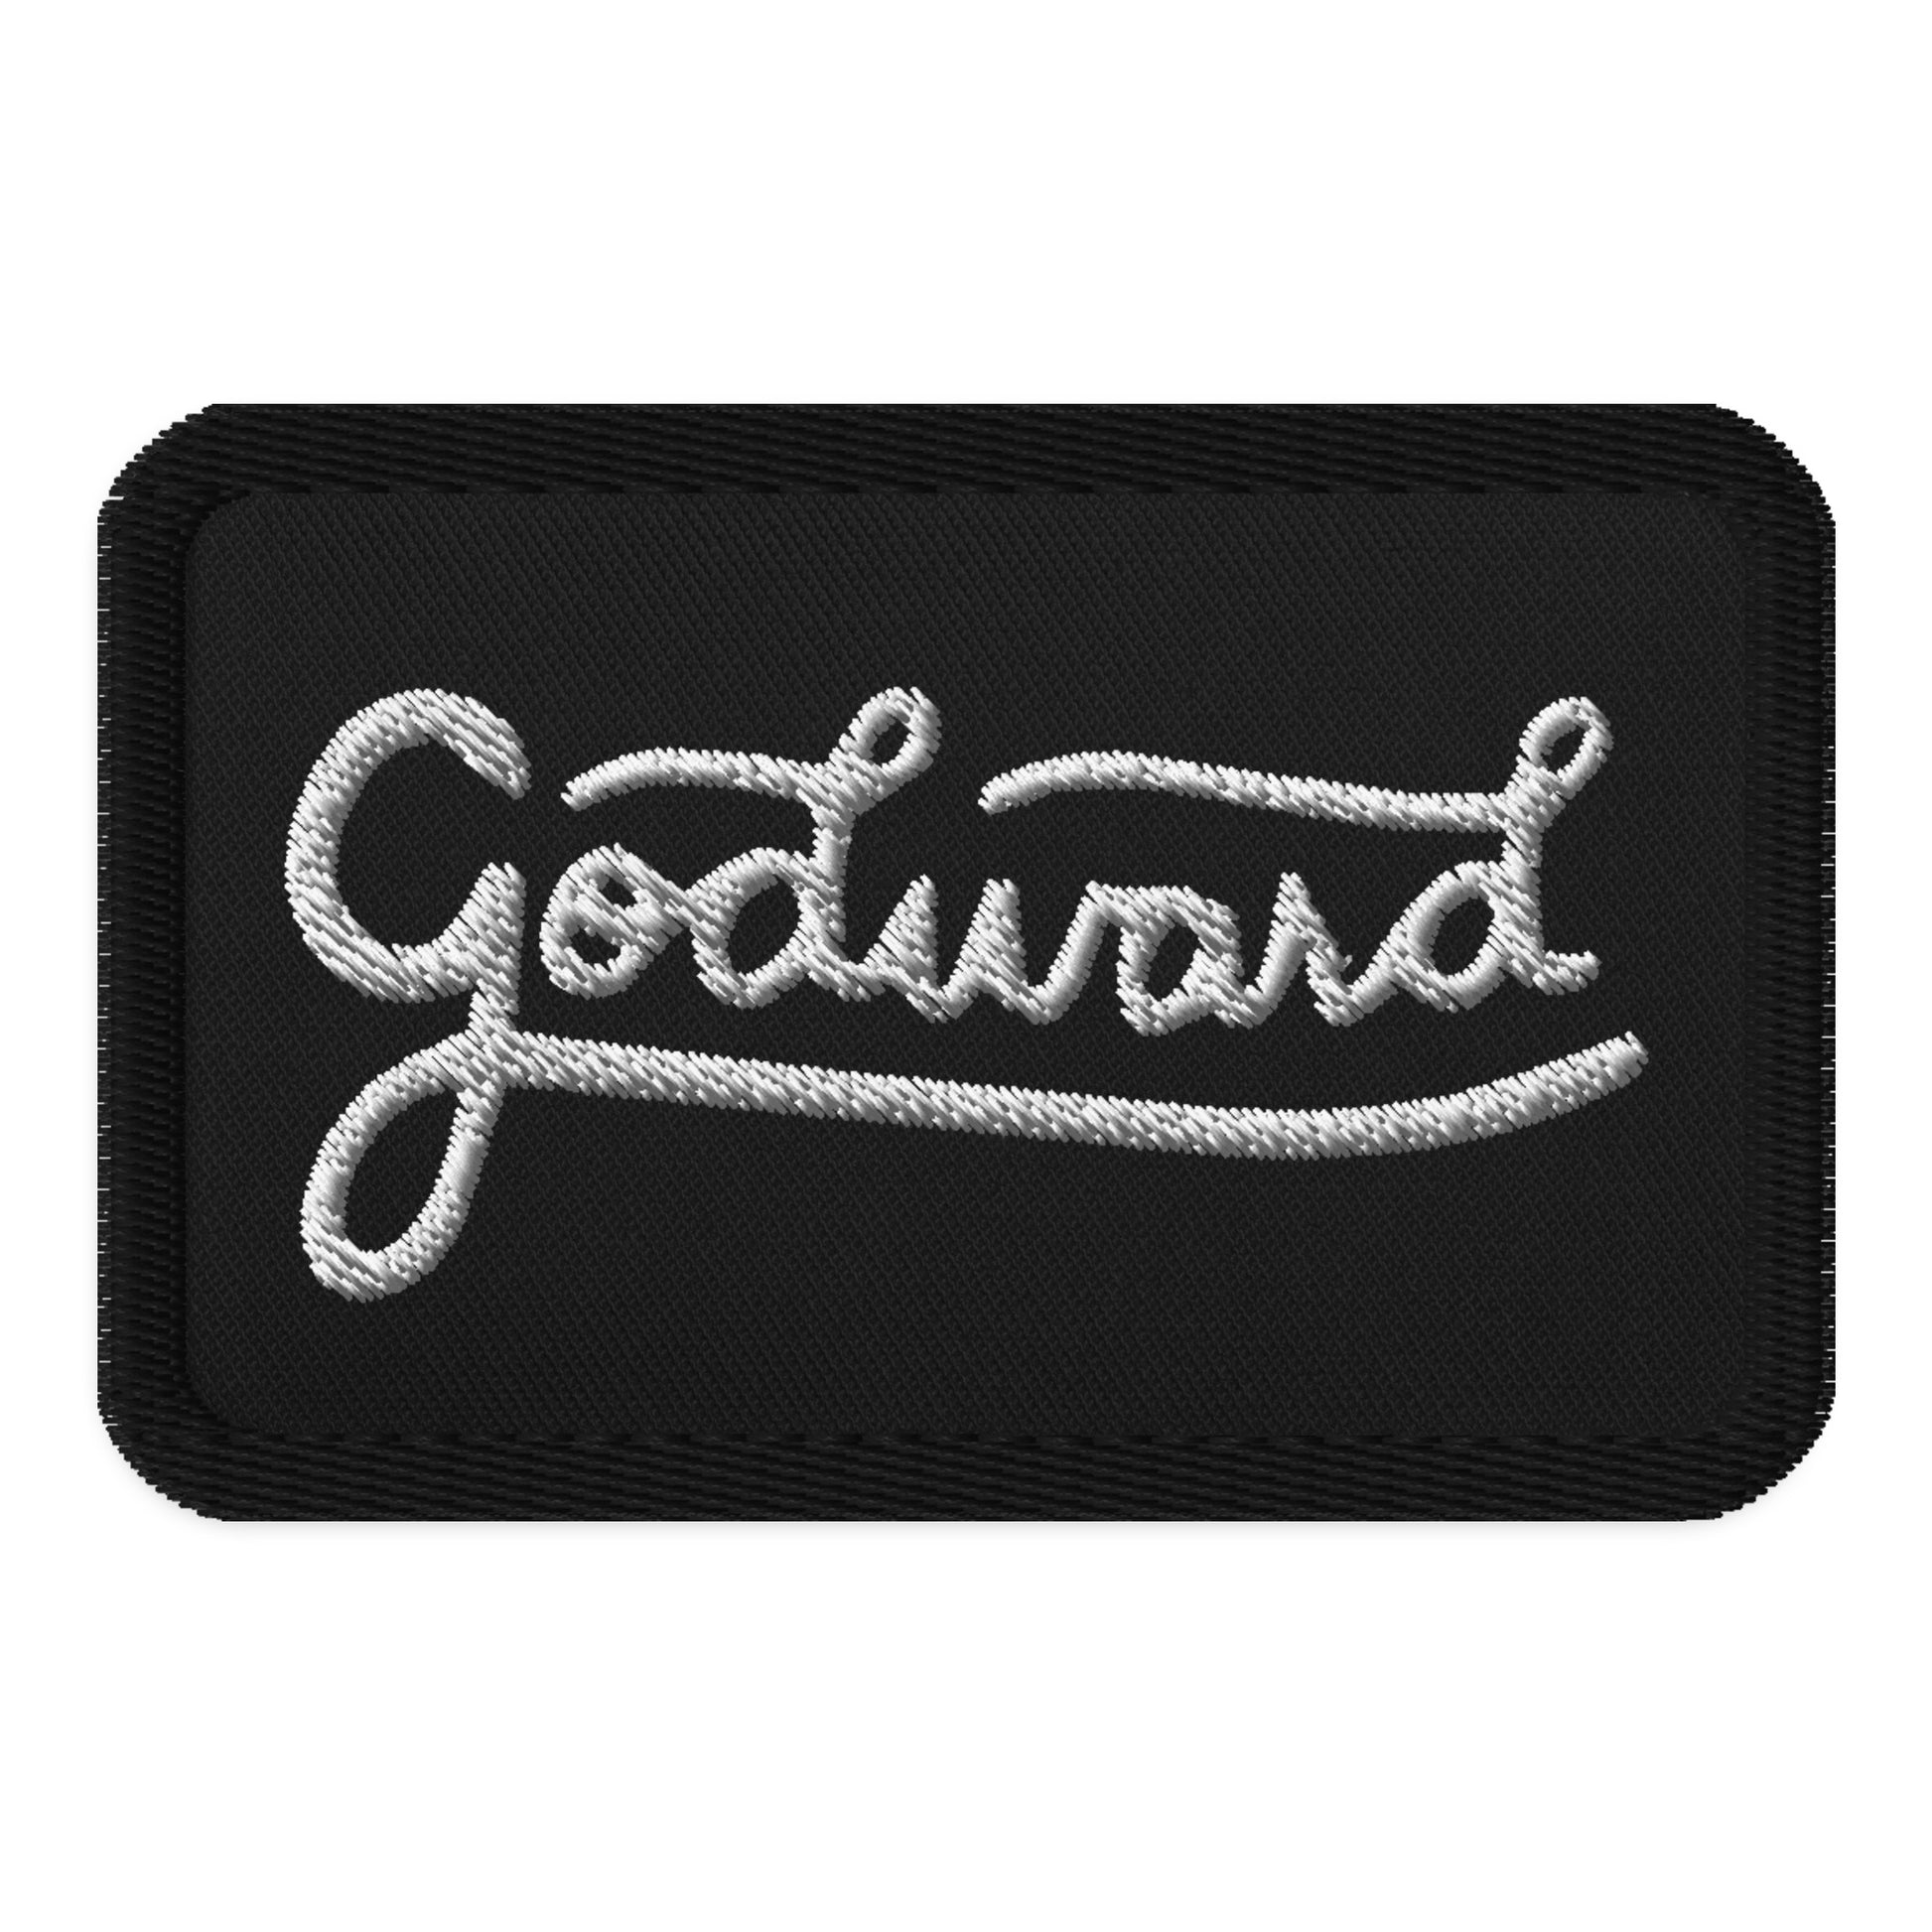 Embroidered Patches - Godward - A Thousand Elsewhere